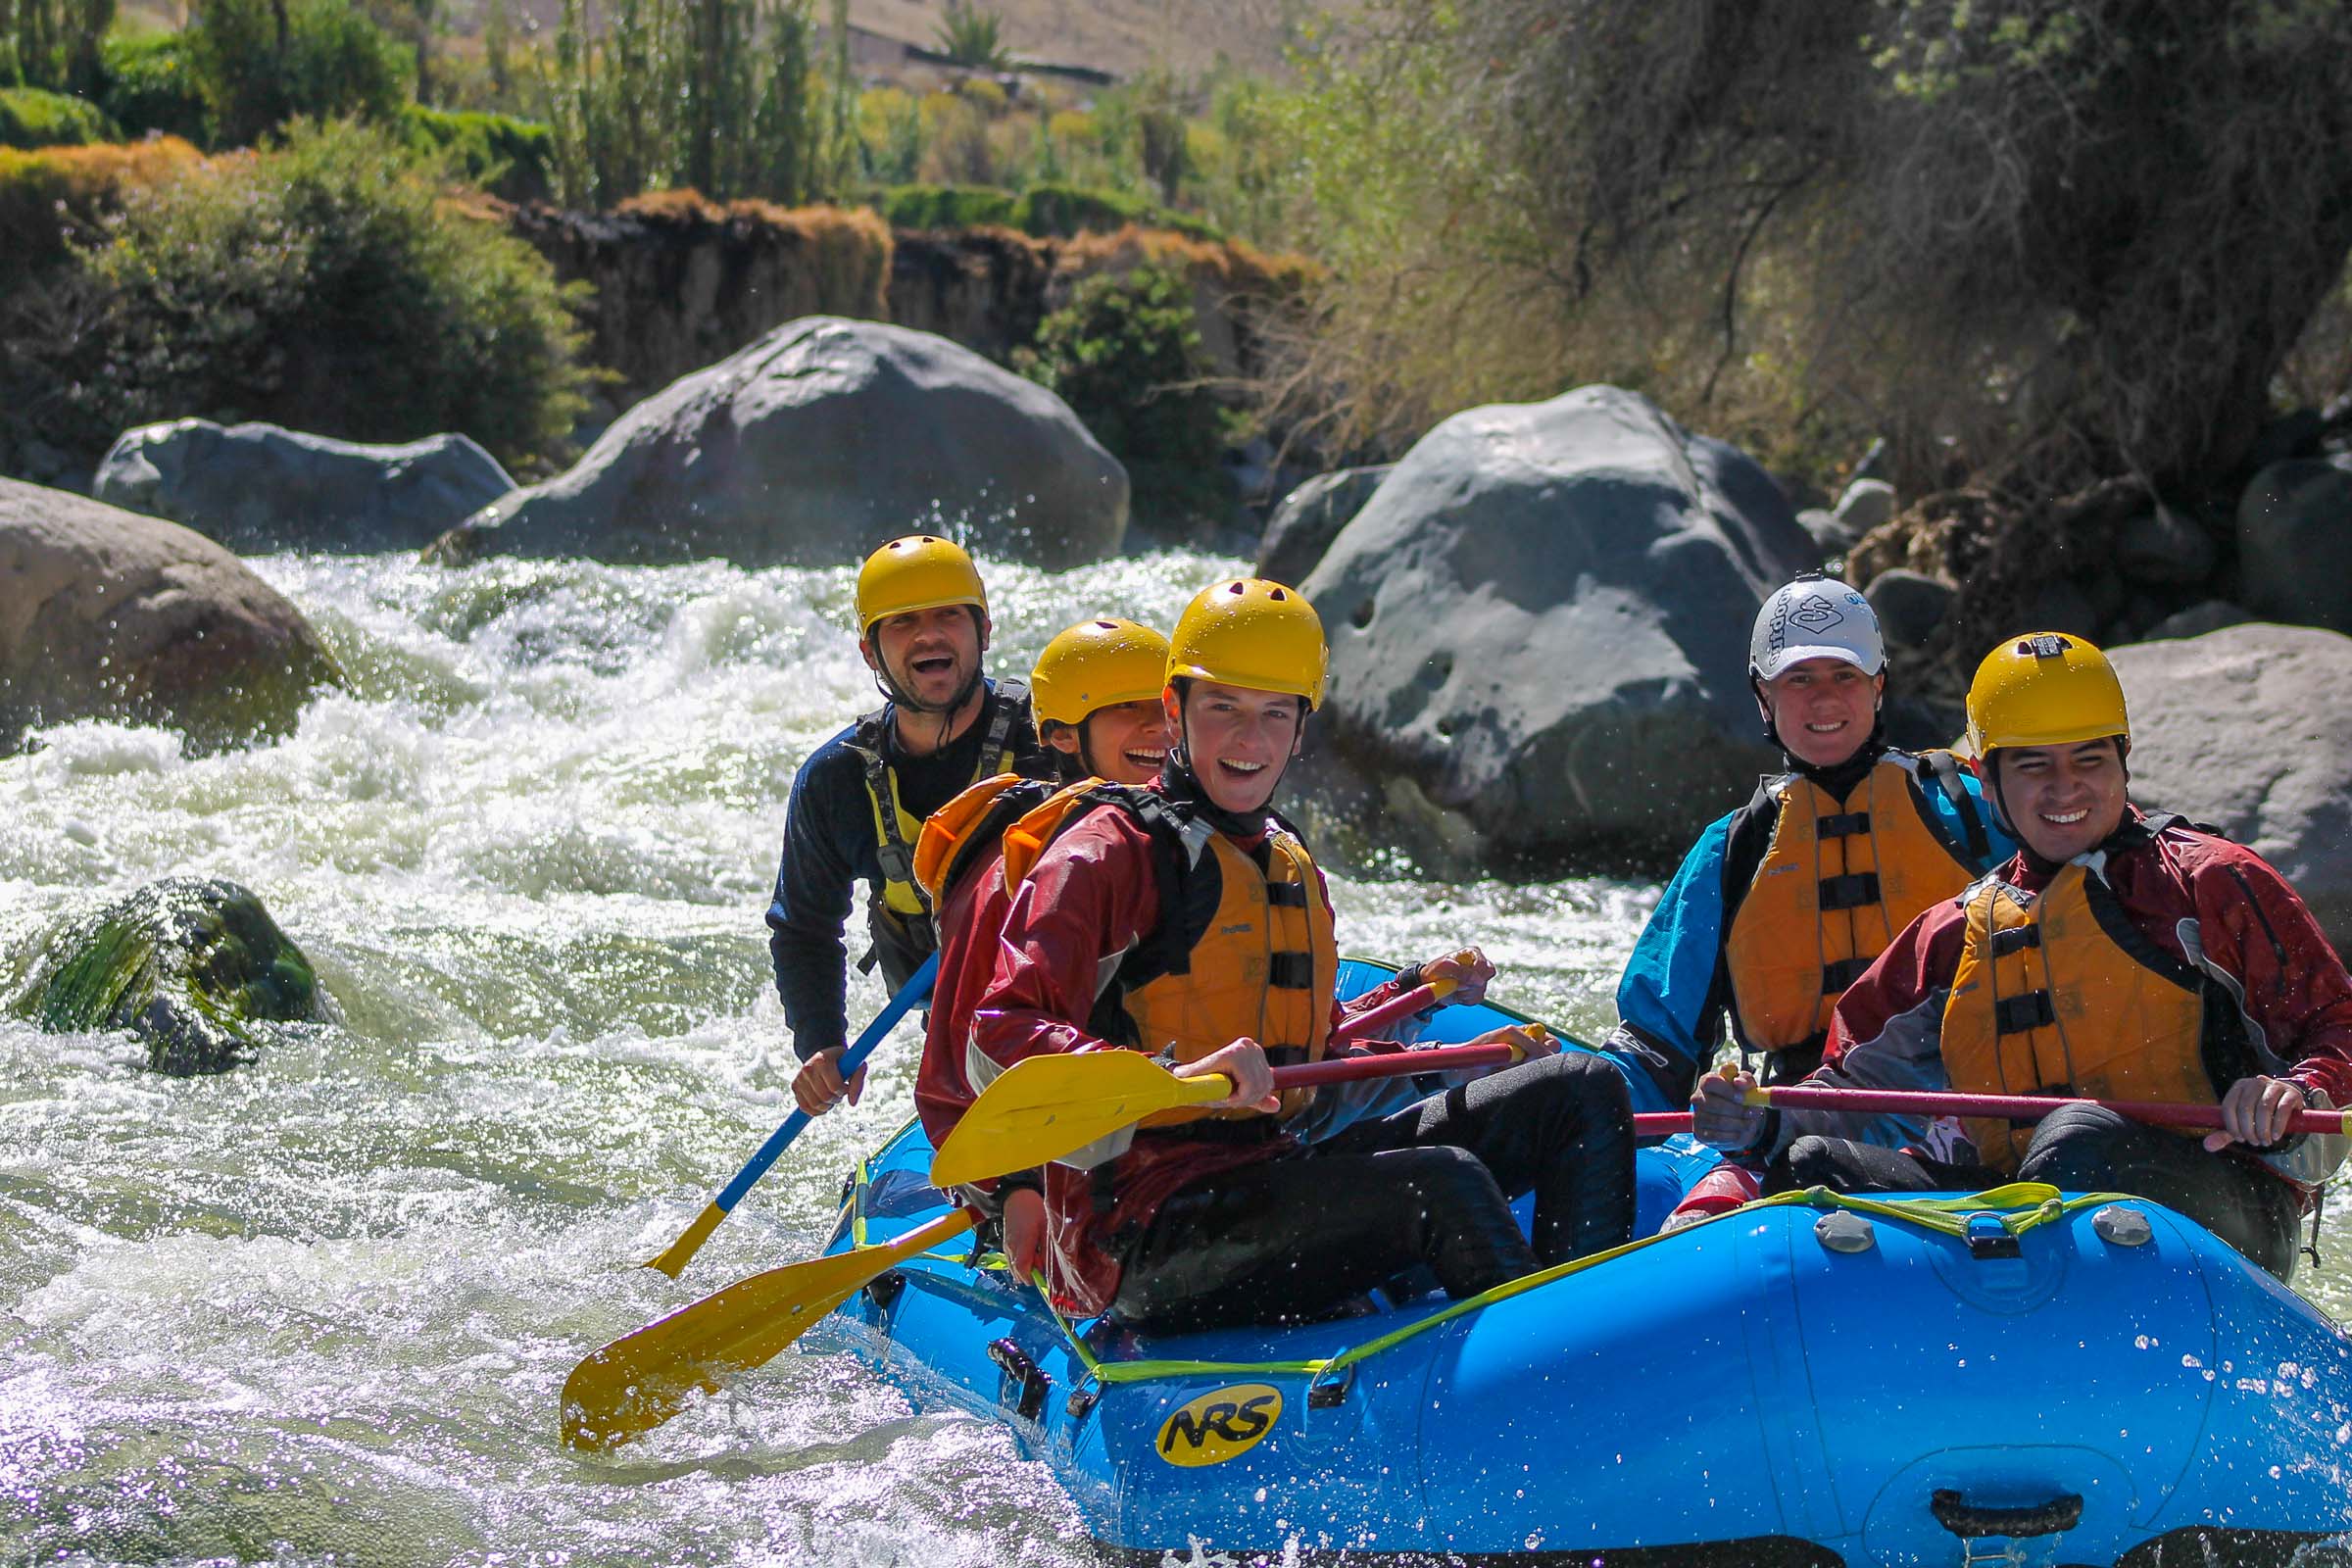 Rafting in the Chilli River by Le Foyer Tours